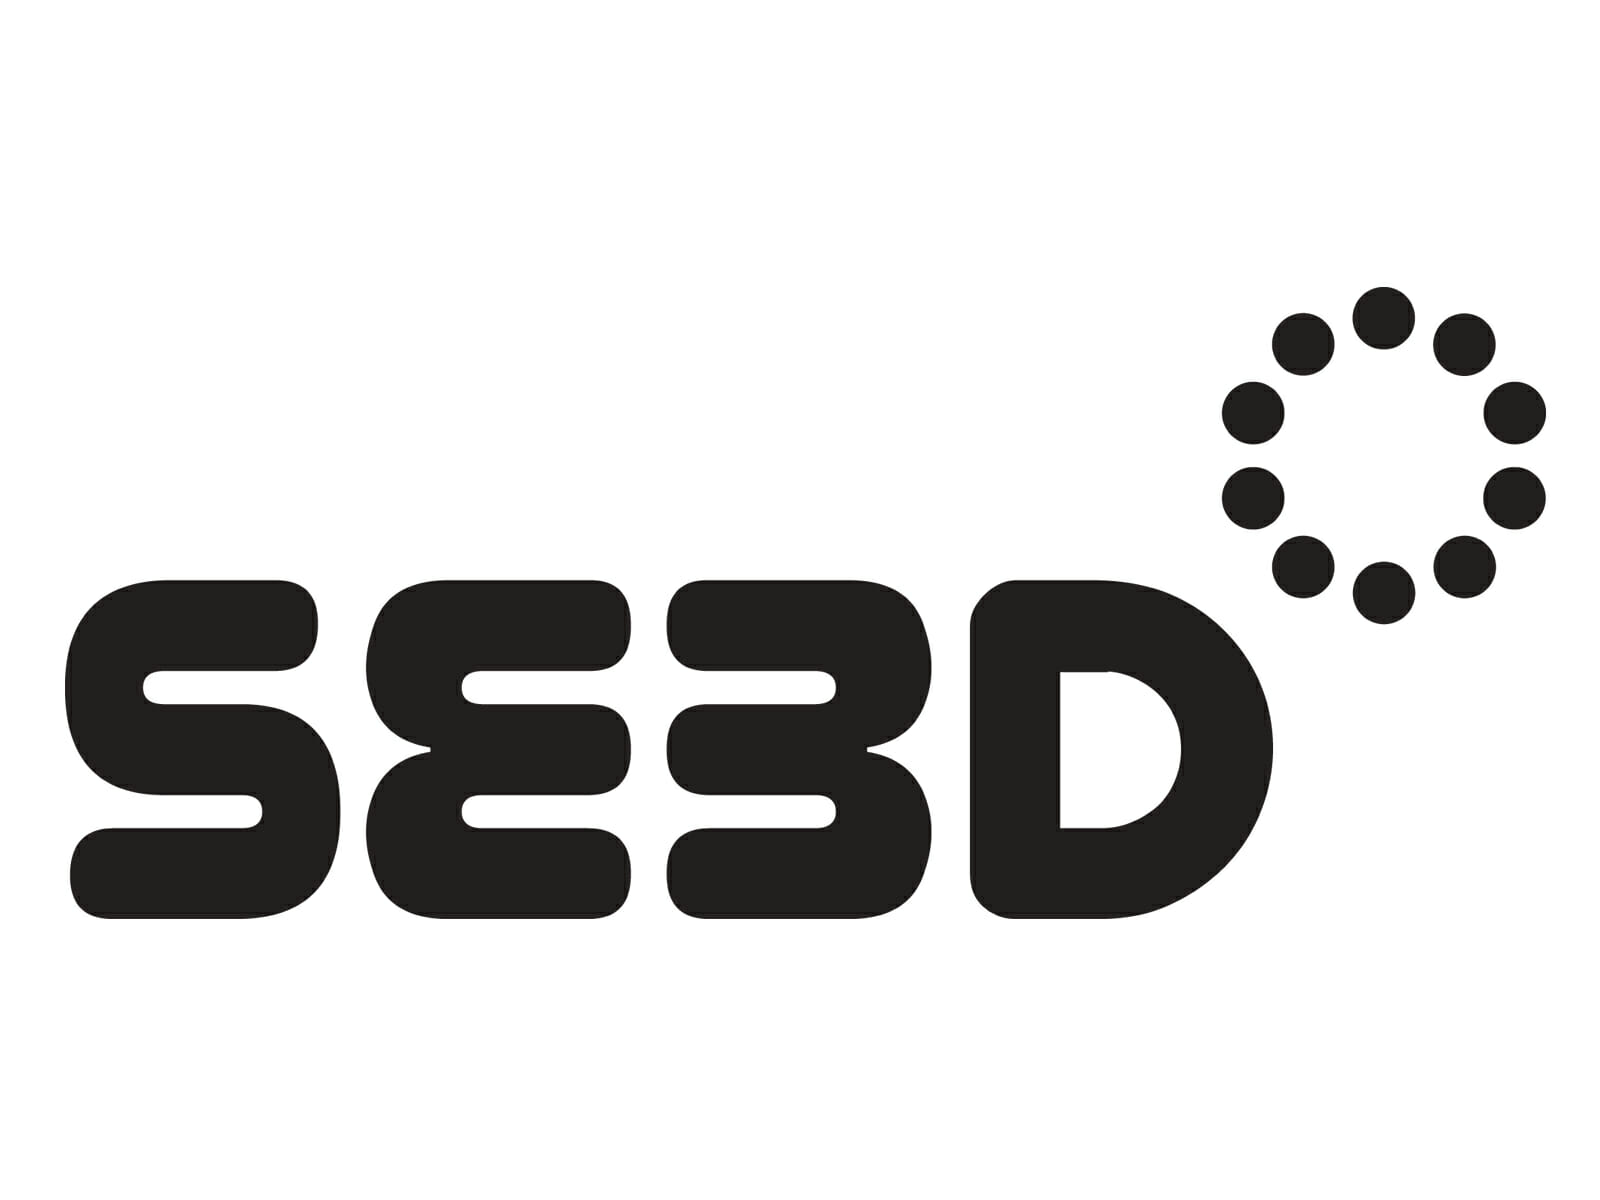 Seed logo for Watershed